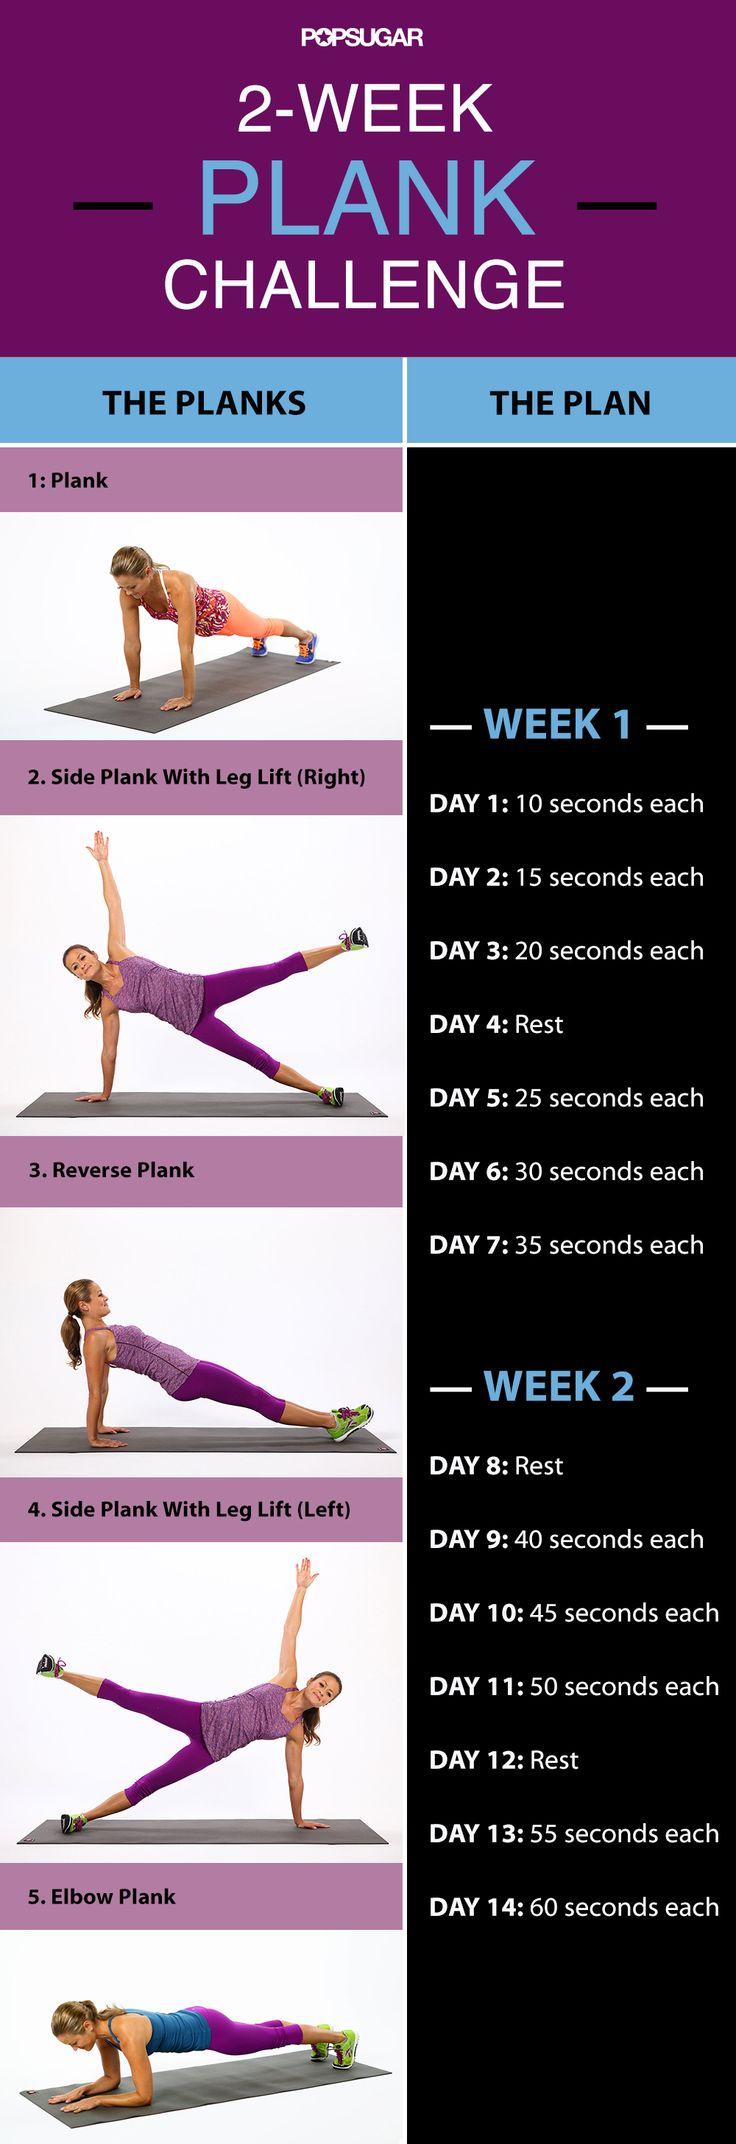 Wedding - 2-Week Plank Challenge: Build Up To A 5-Minute Plank